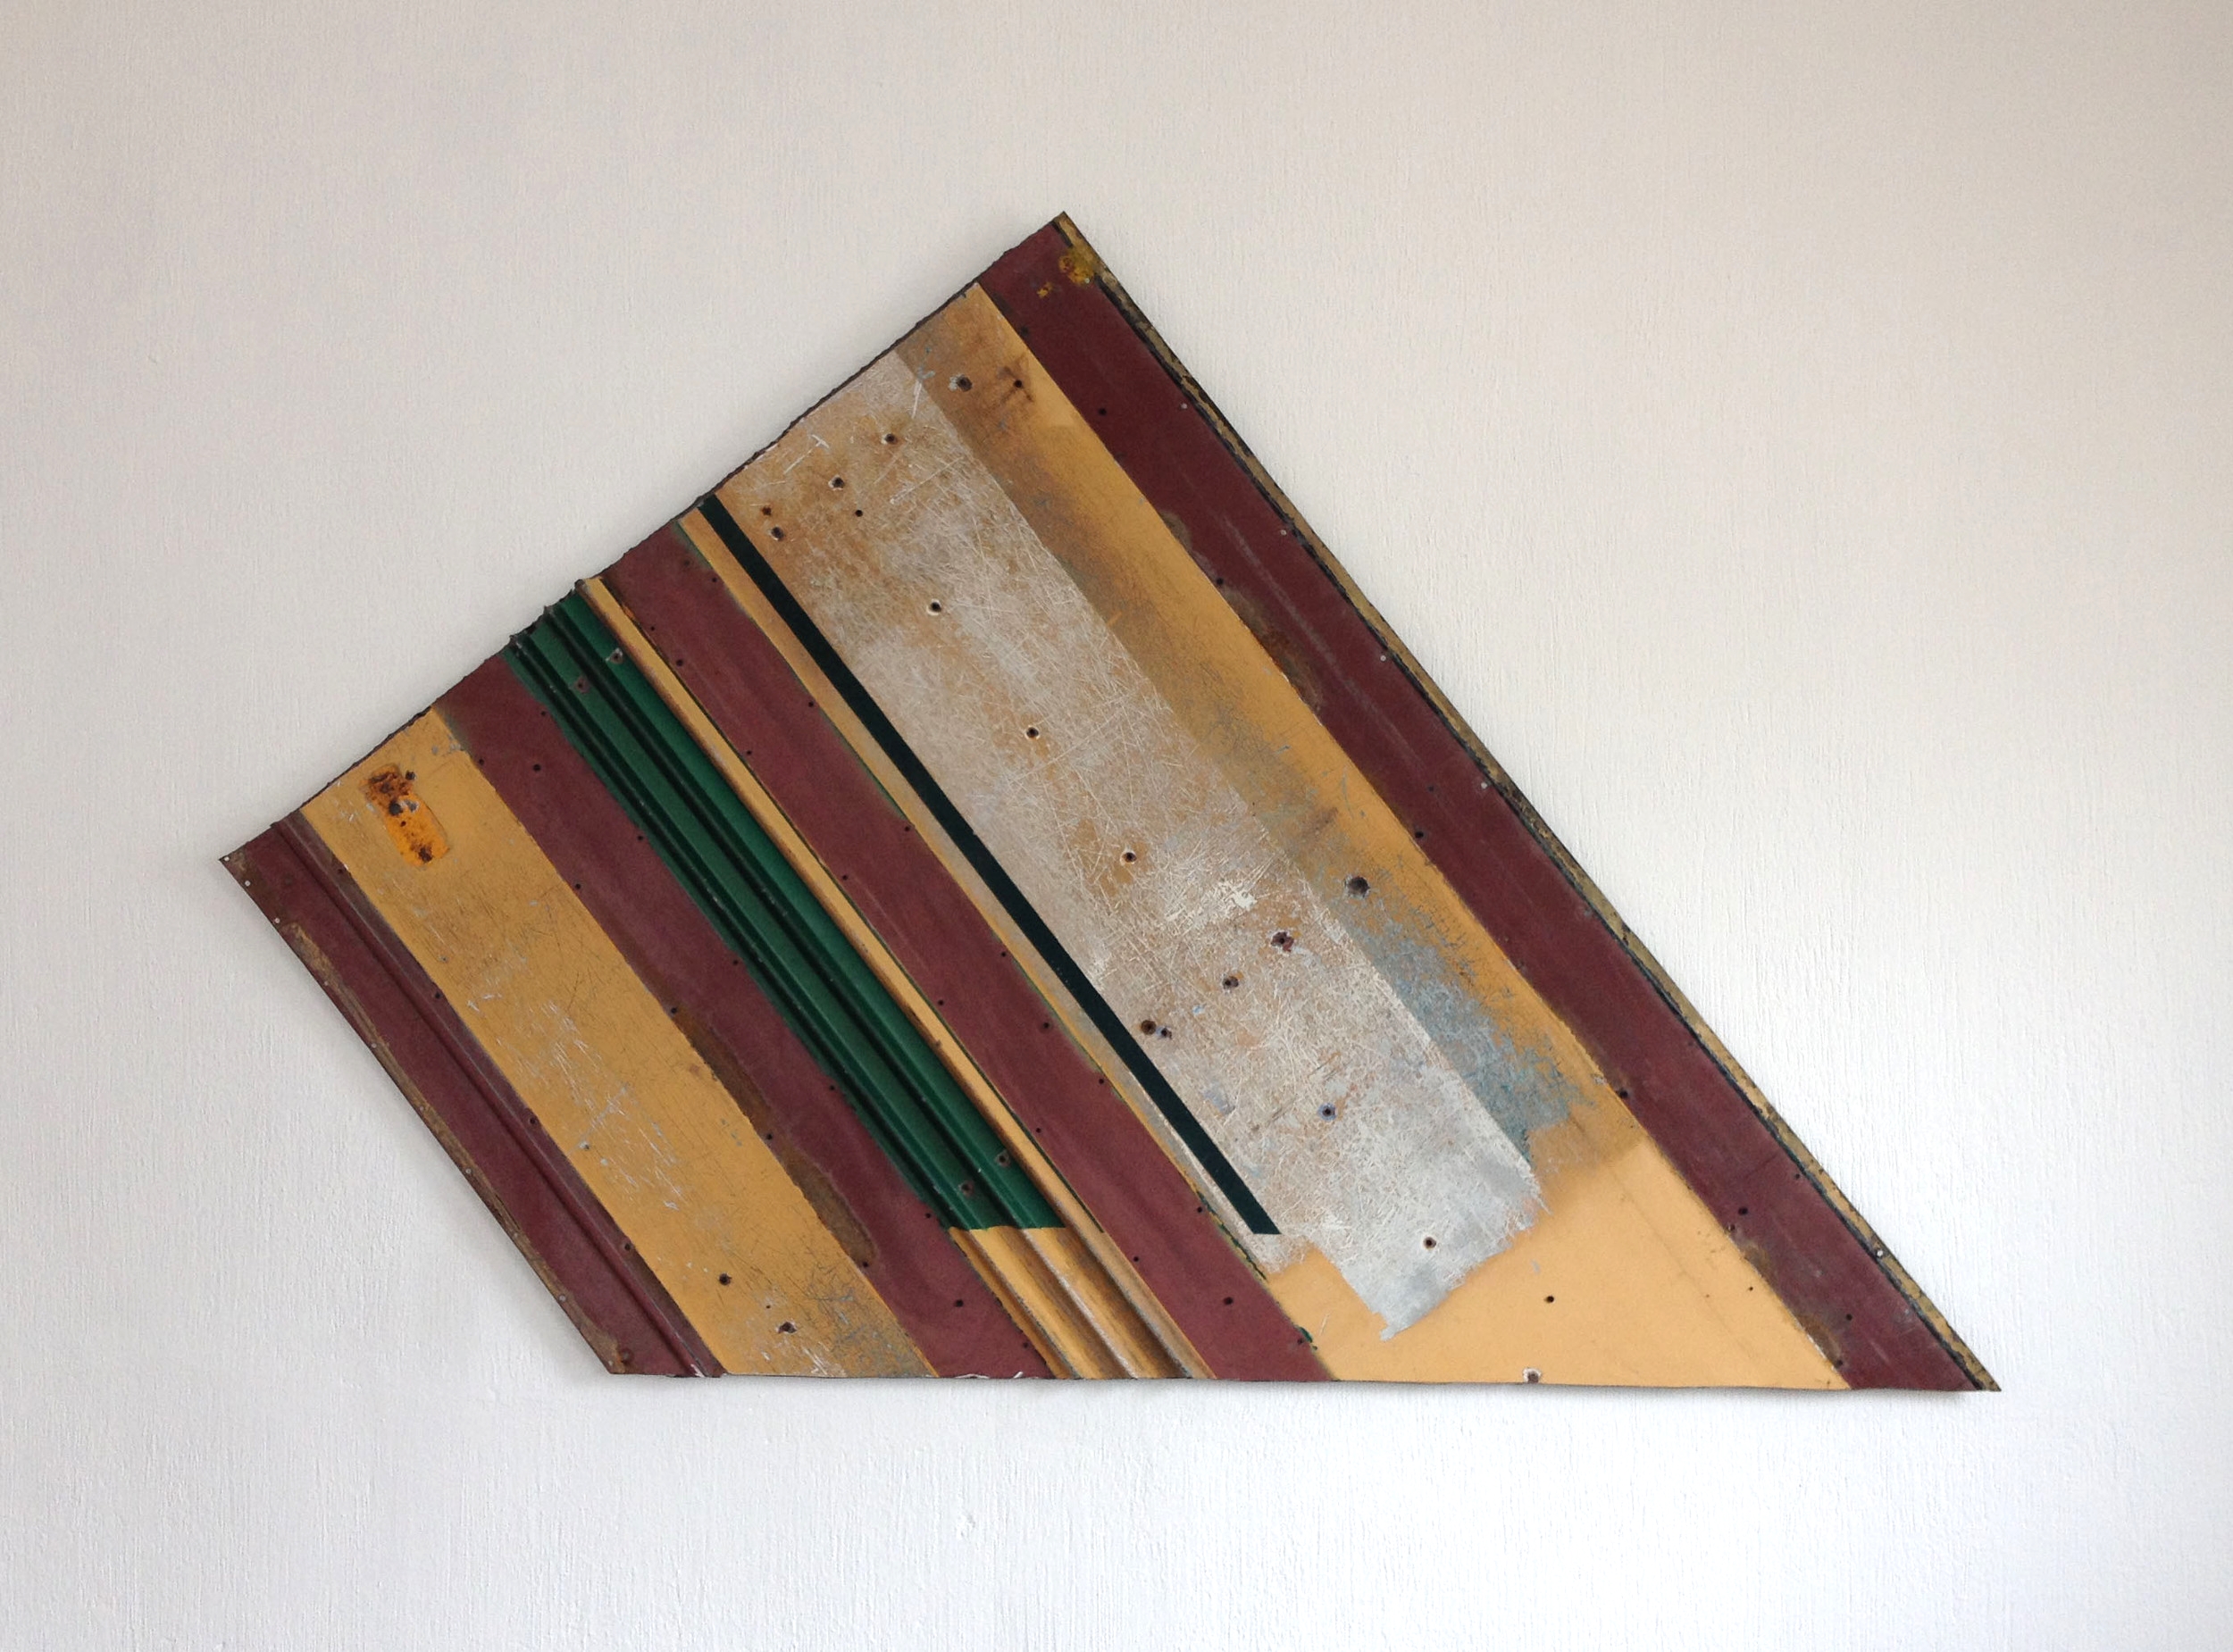   Geometric Construction No. 1    2014  Urban bus found iron panel&nbsp;  assambled on wood and conserved with  acryloid.  168 x 104 x 4 cm.  Photo credit: artist&nbsp; 